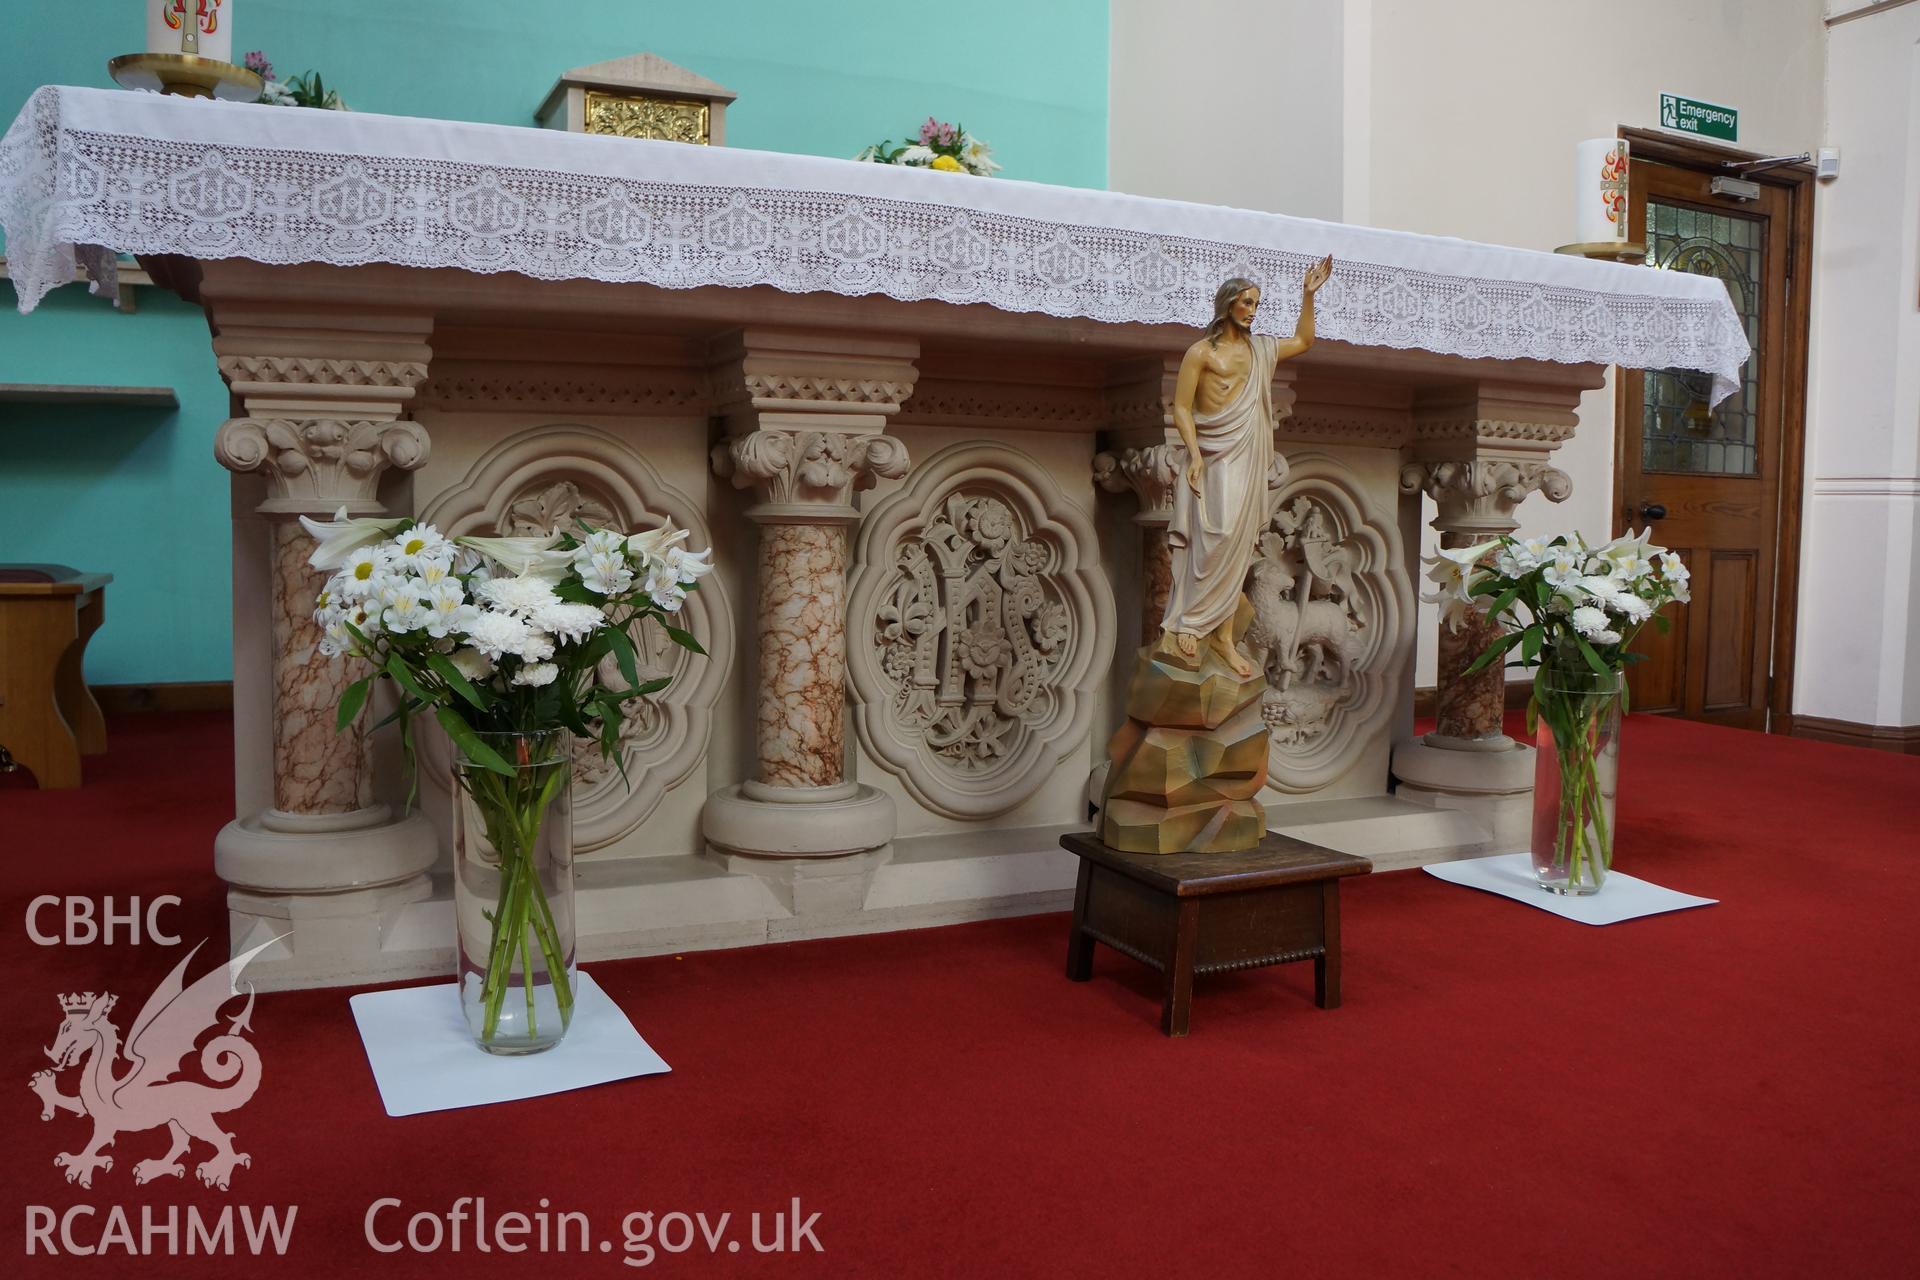 Digital colour photograph showing the High Gothic altar at Blessed Trinity Catholic church, Queensferry.